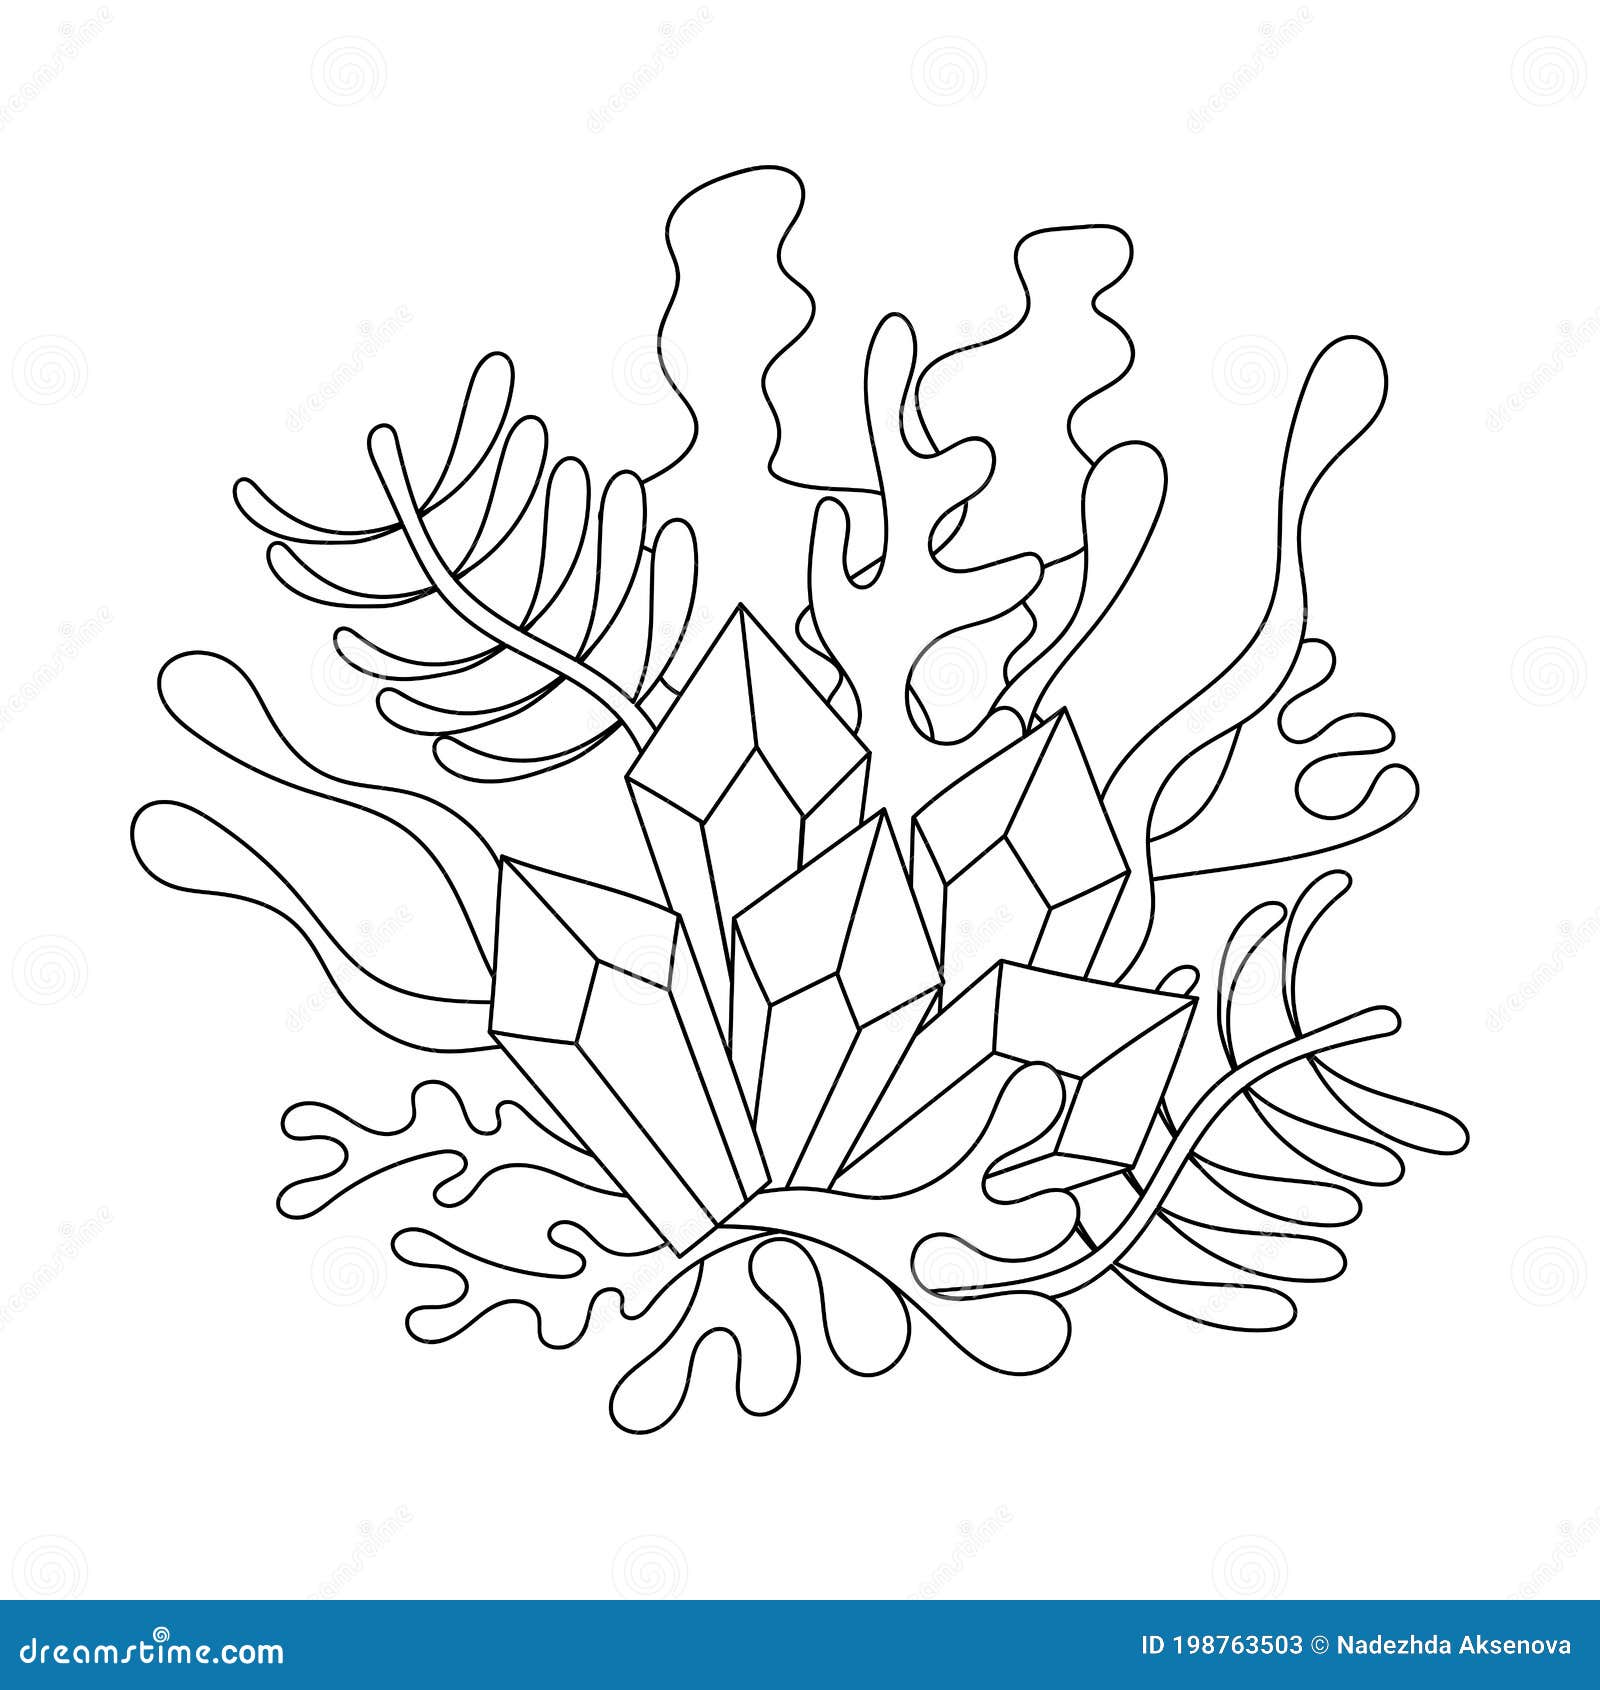 Coloring Page With Rystals And Algae Plants Underwater World Sea Ocean River Hand Drawn Doodle Composition Stock Vector Illustration Of Abstract Crystal 198763503